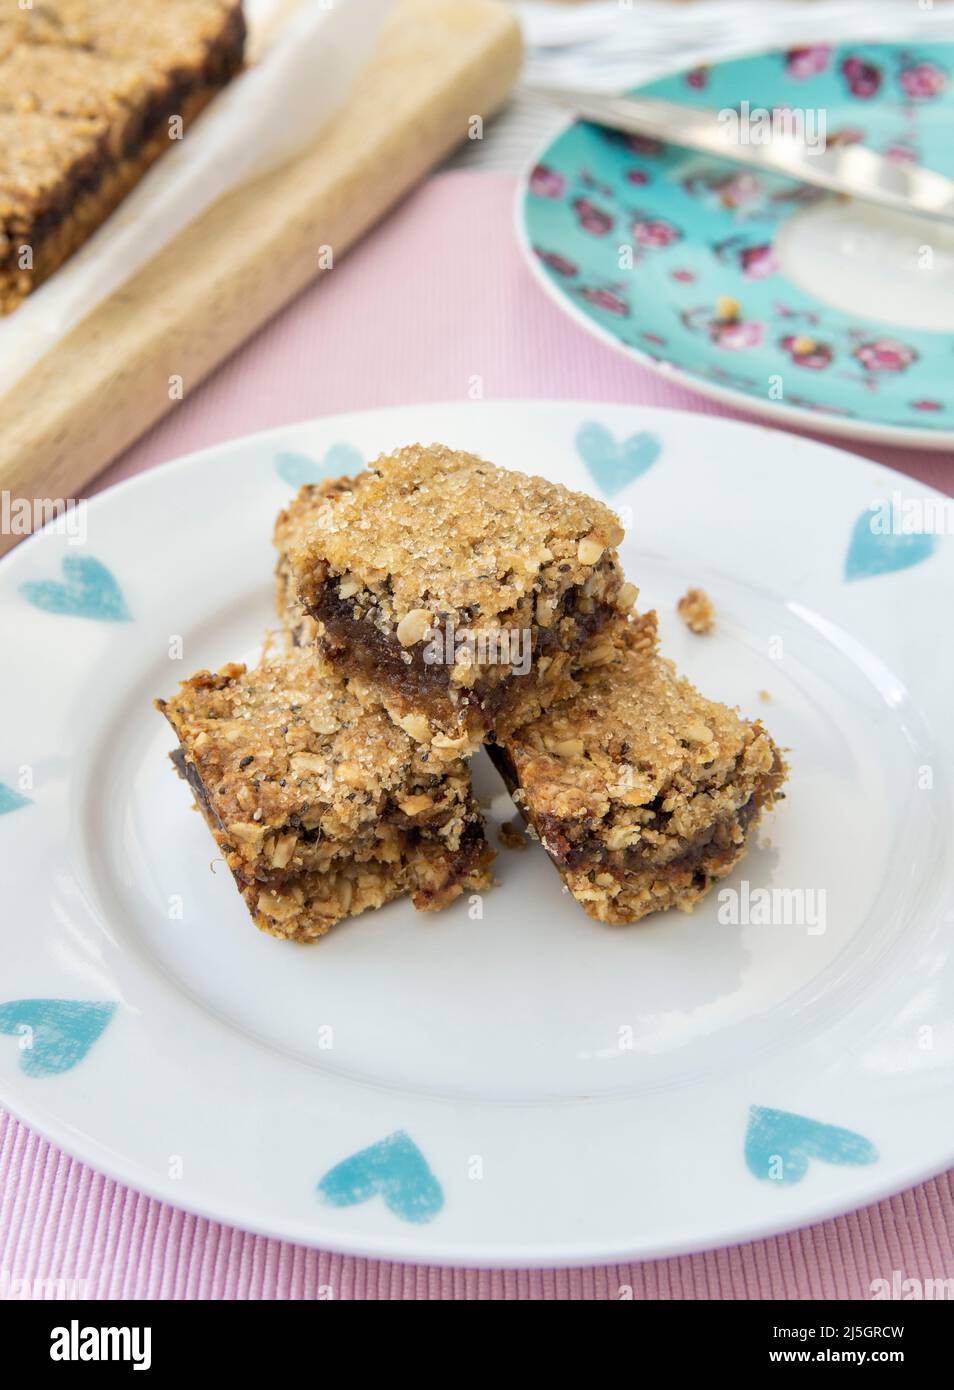 Home made tray bake of Date and Oat slices. Cut into squares Stock Photo